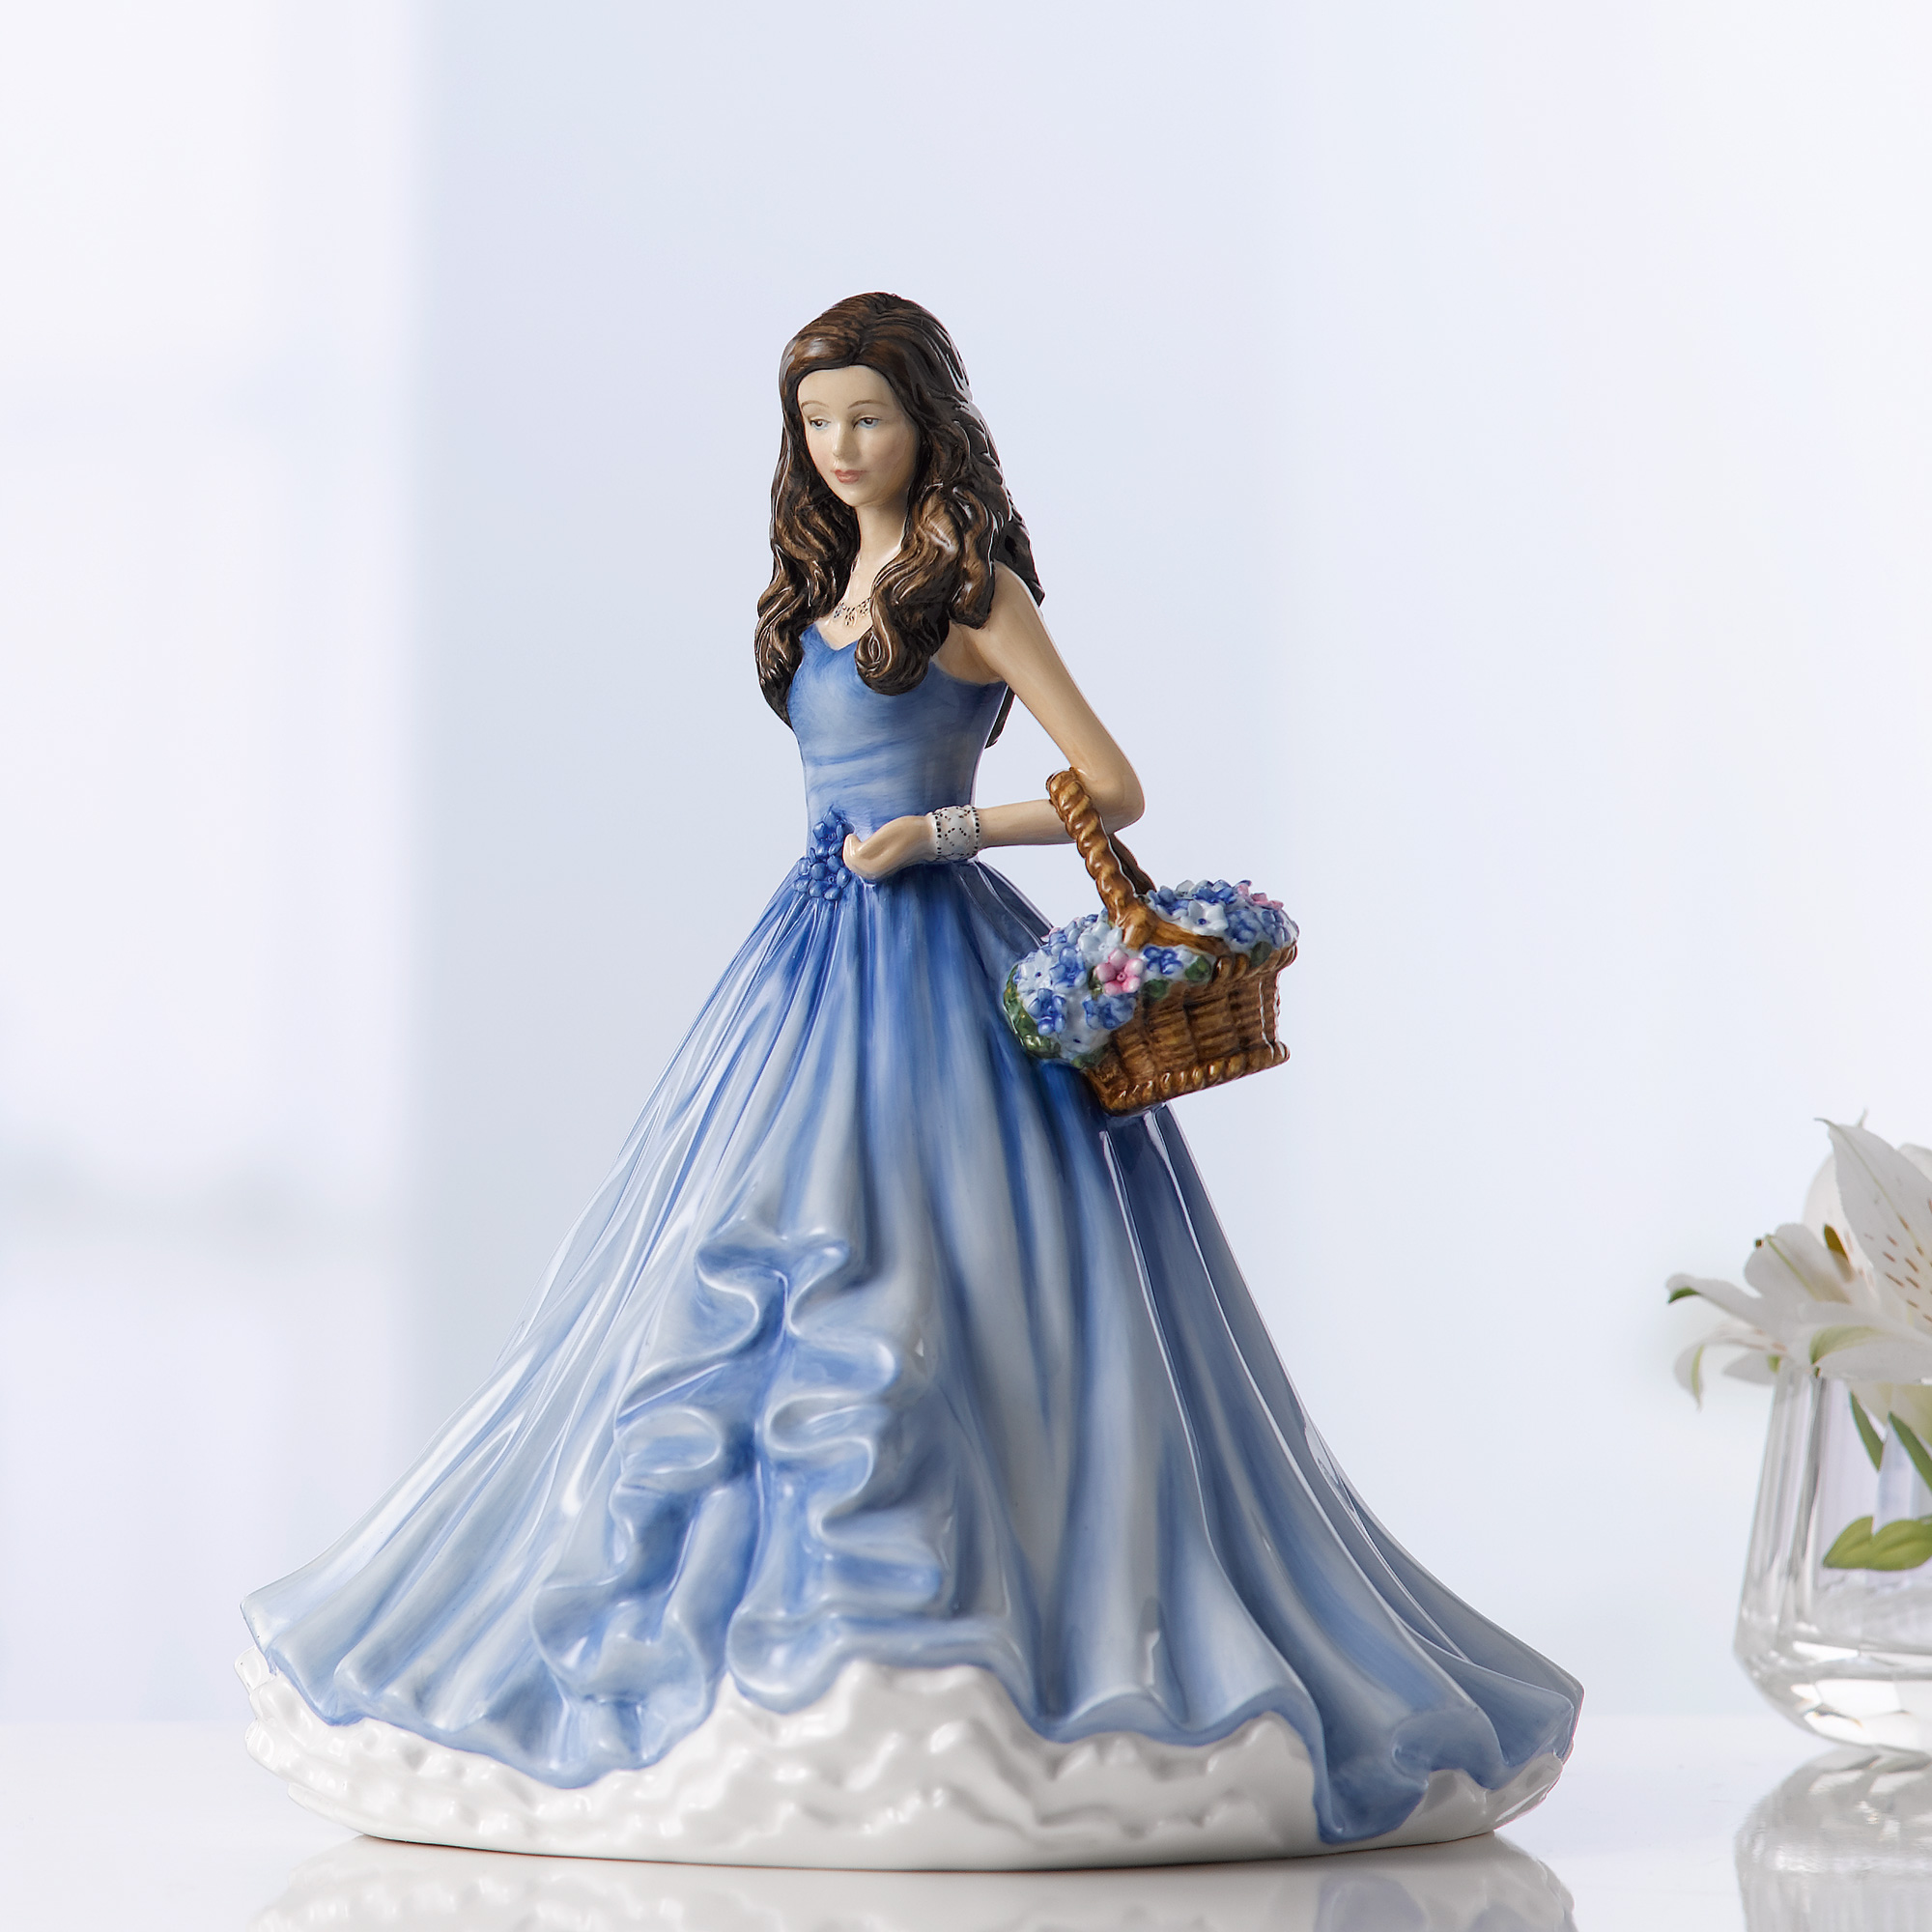 Details about  / ROYAL DOULTON FORGET ME NOT FIGURINE HN5836 R2331